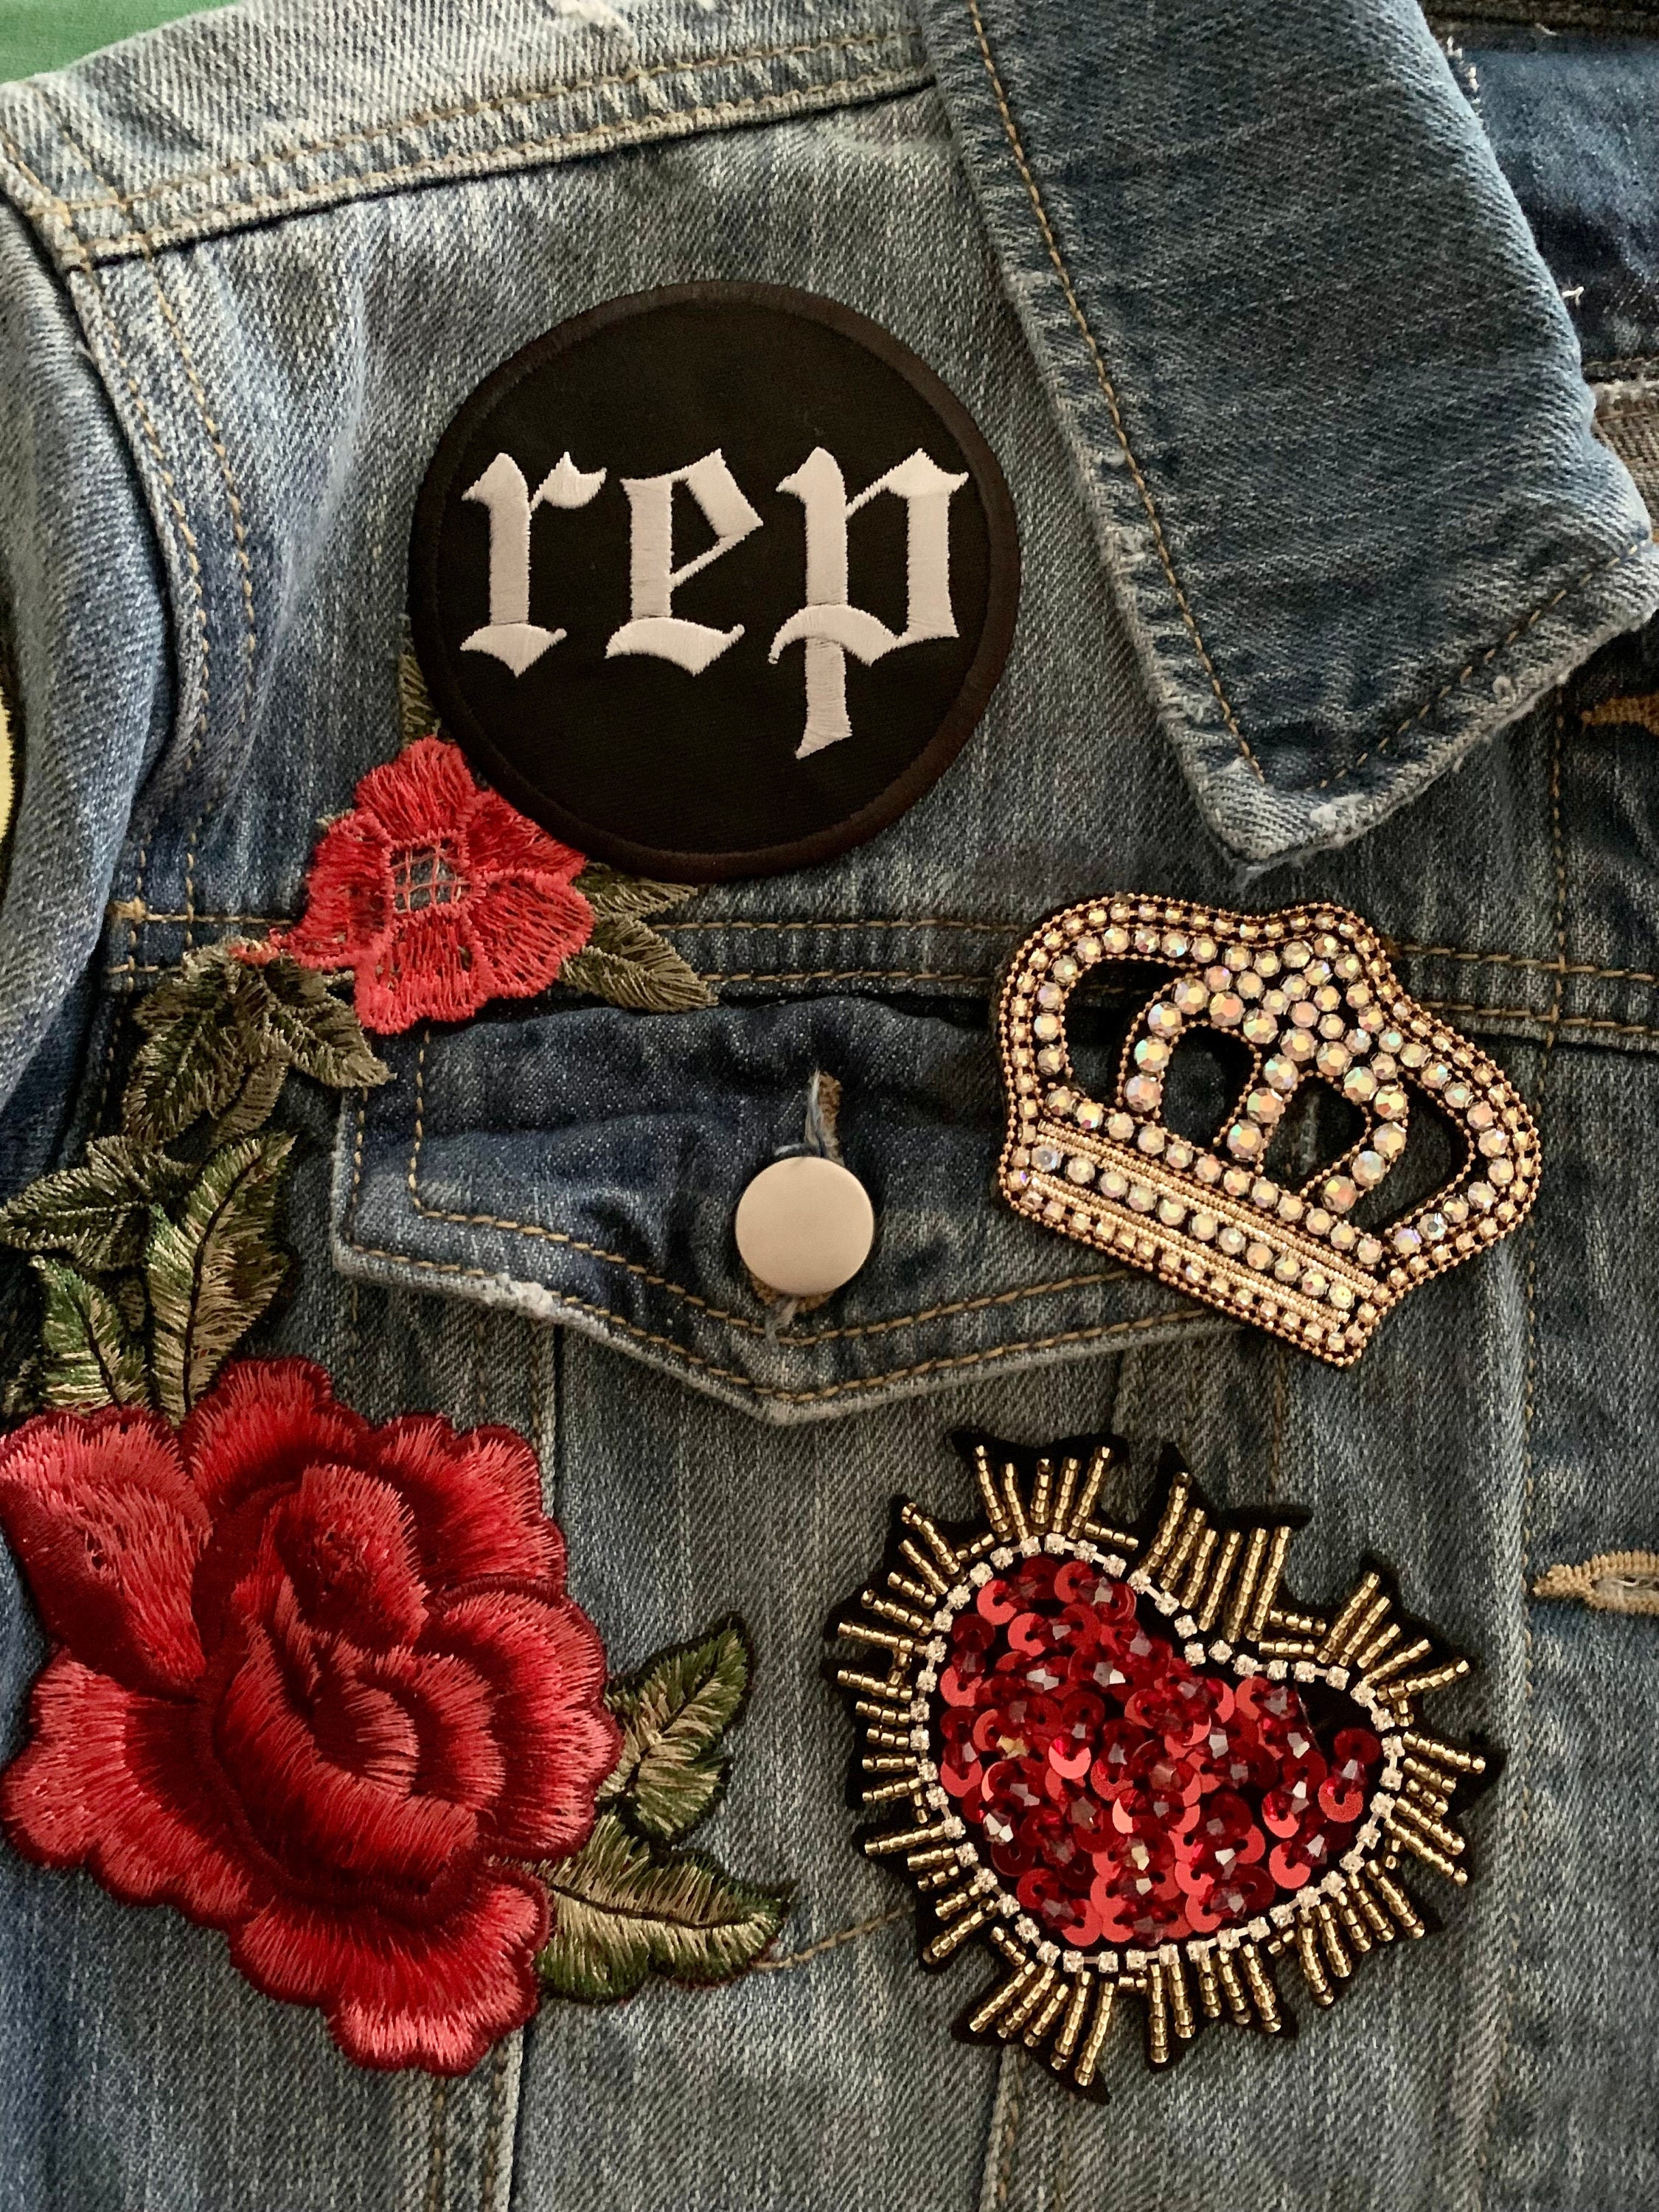 My Reputation Jacket I made. The patches are from the Taylor Swift